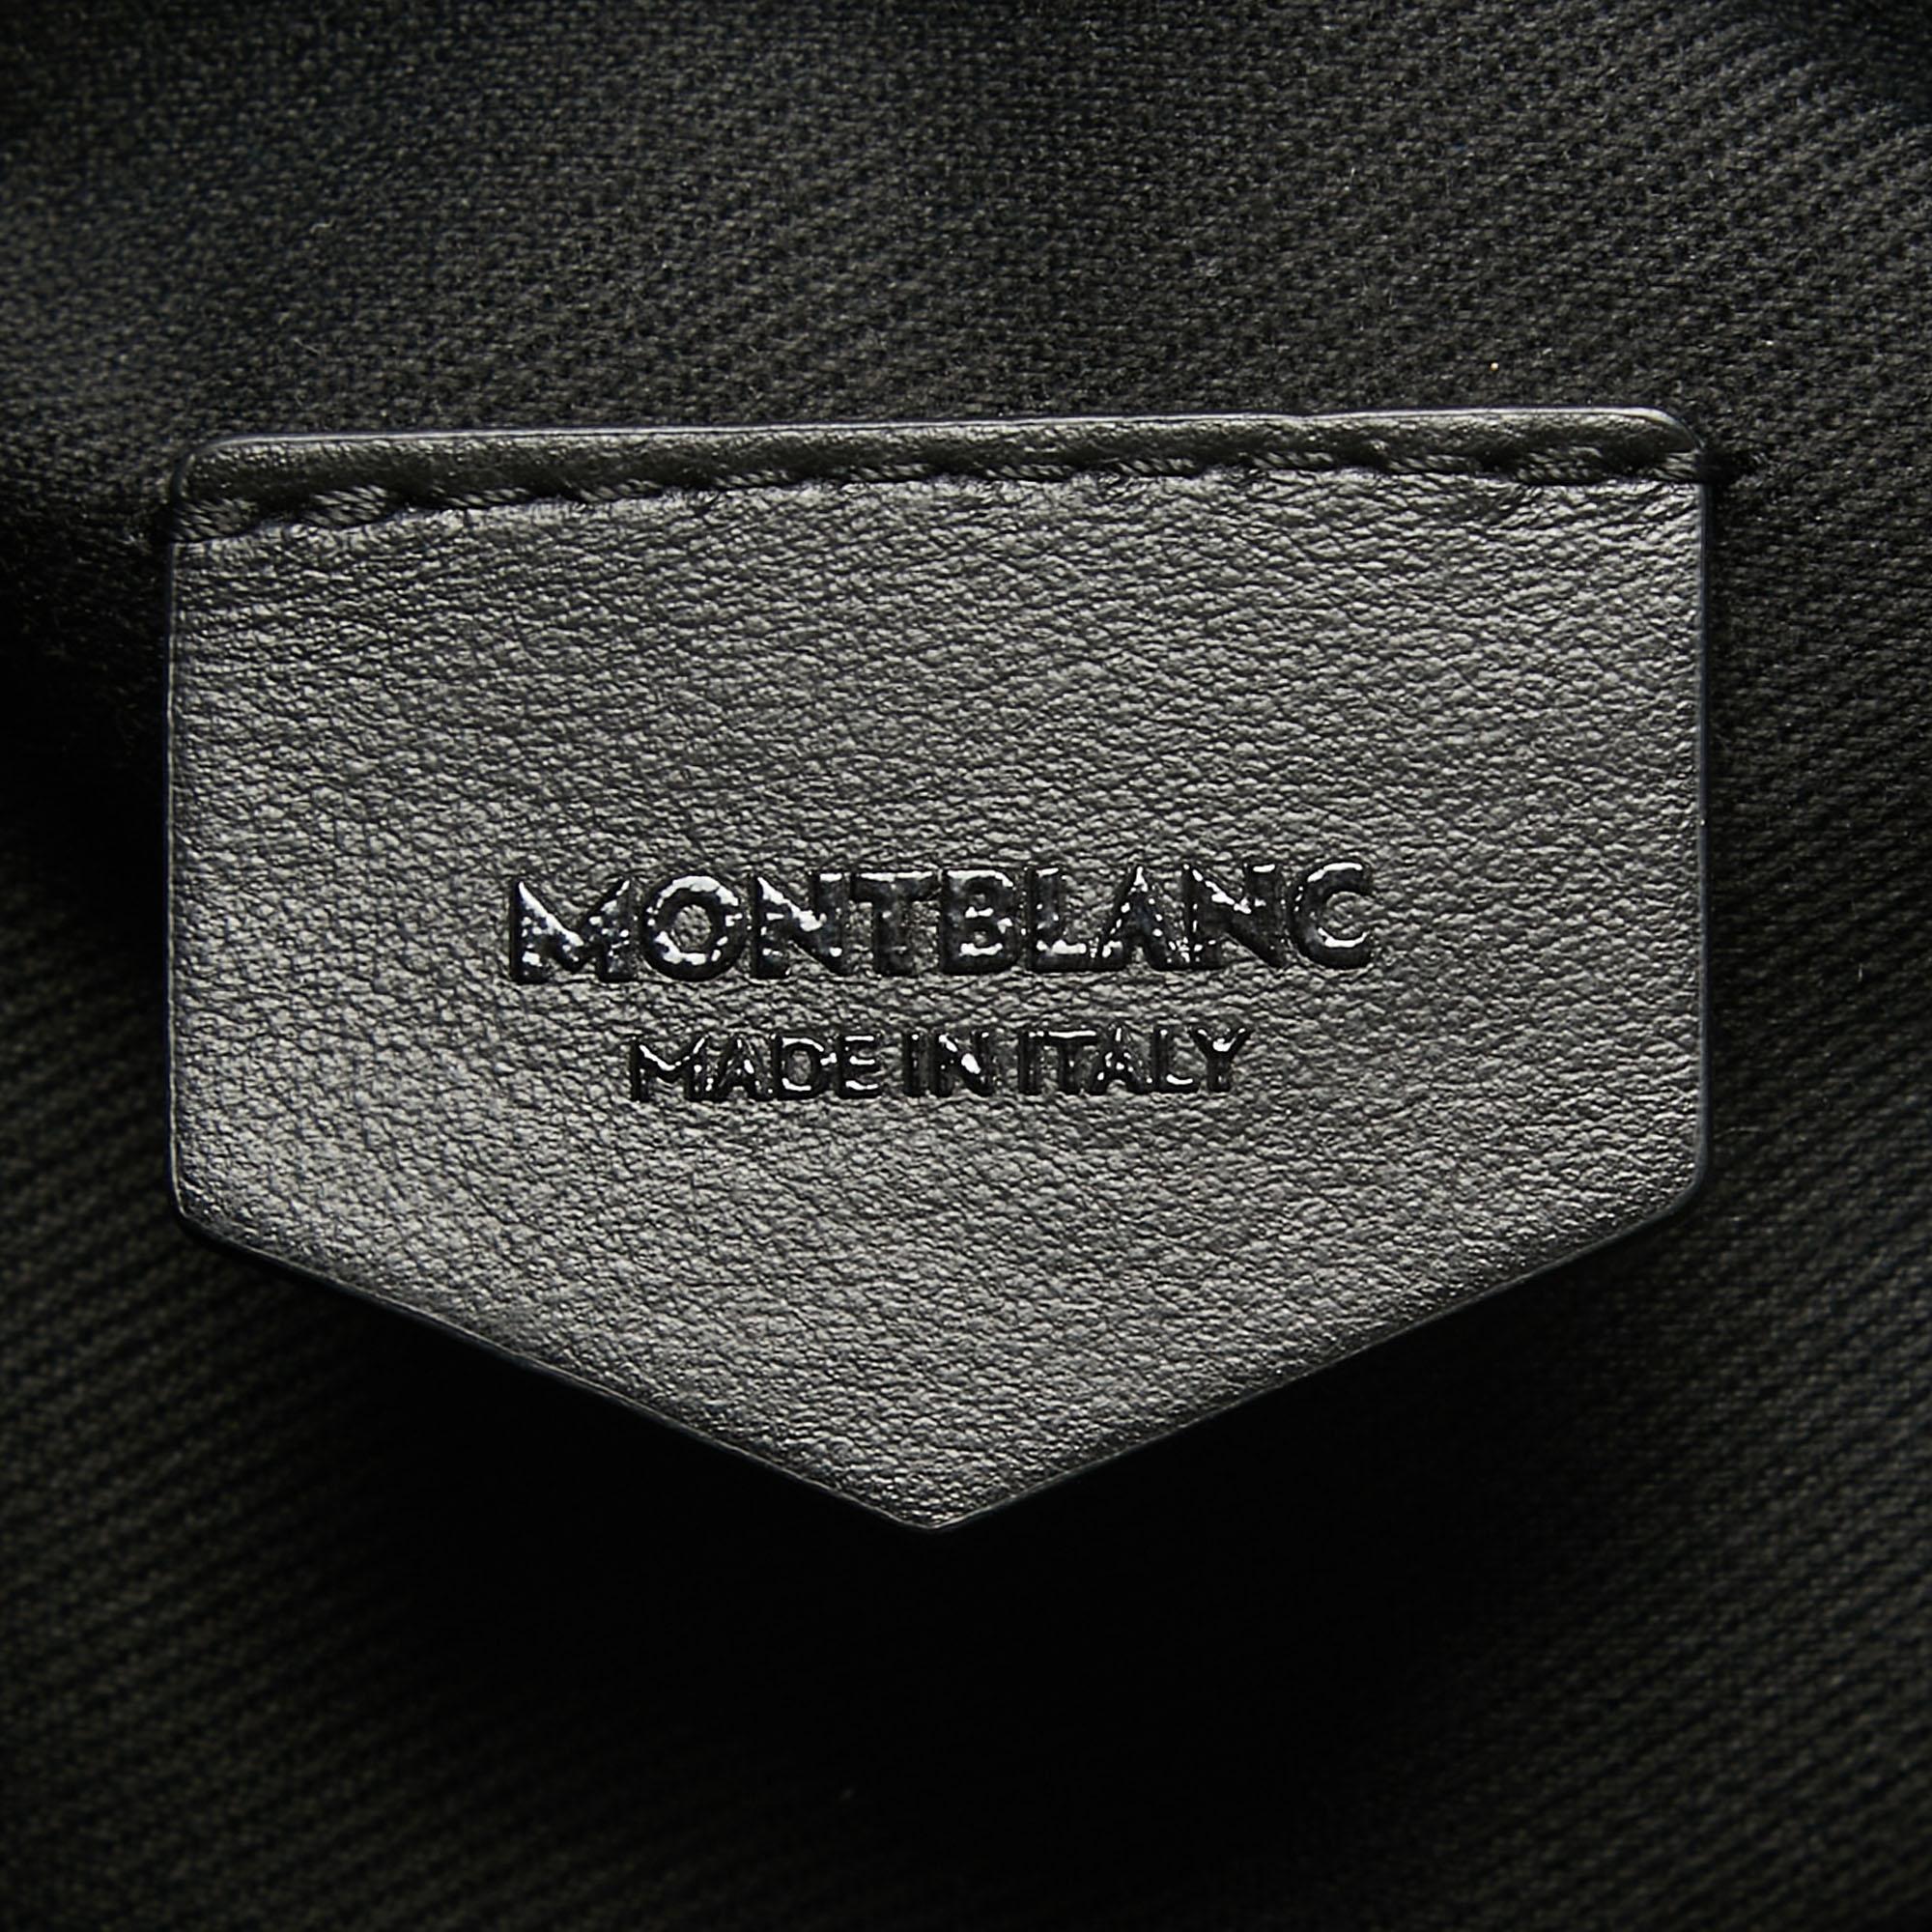 Montblanc Grey Leather Sartorial Vertical Tote 7